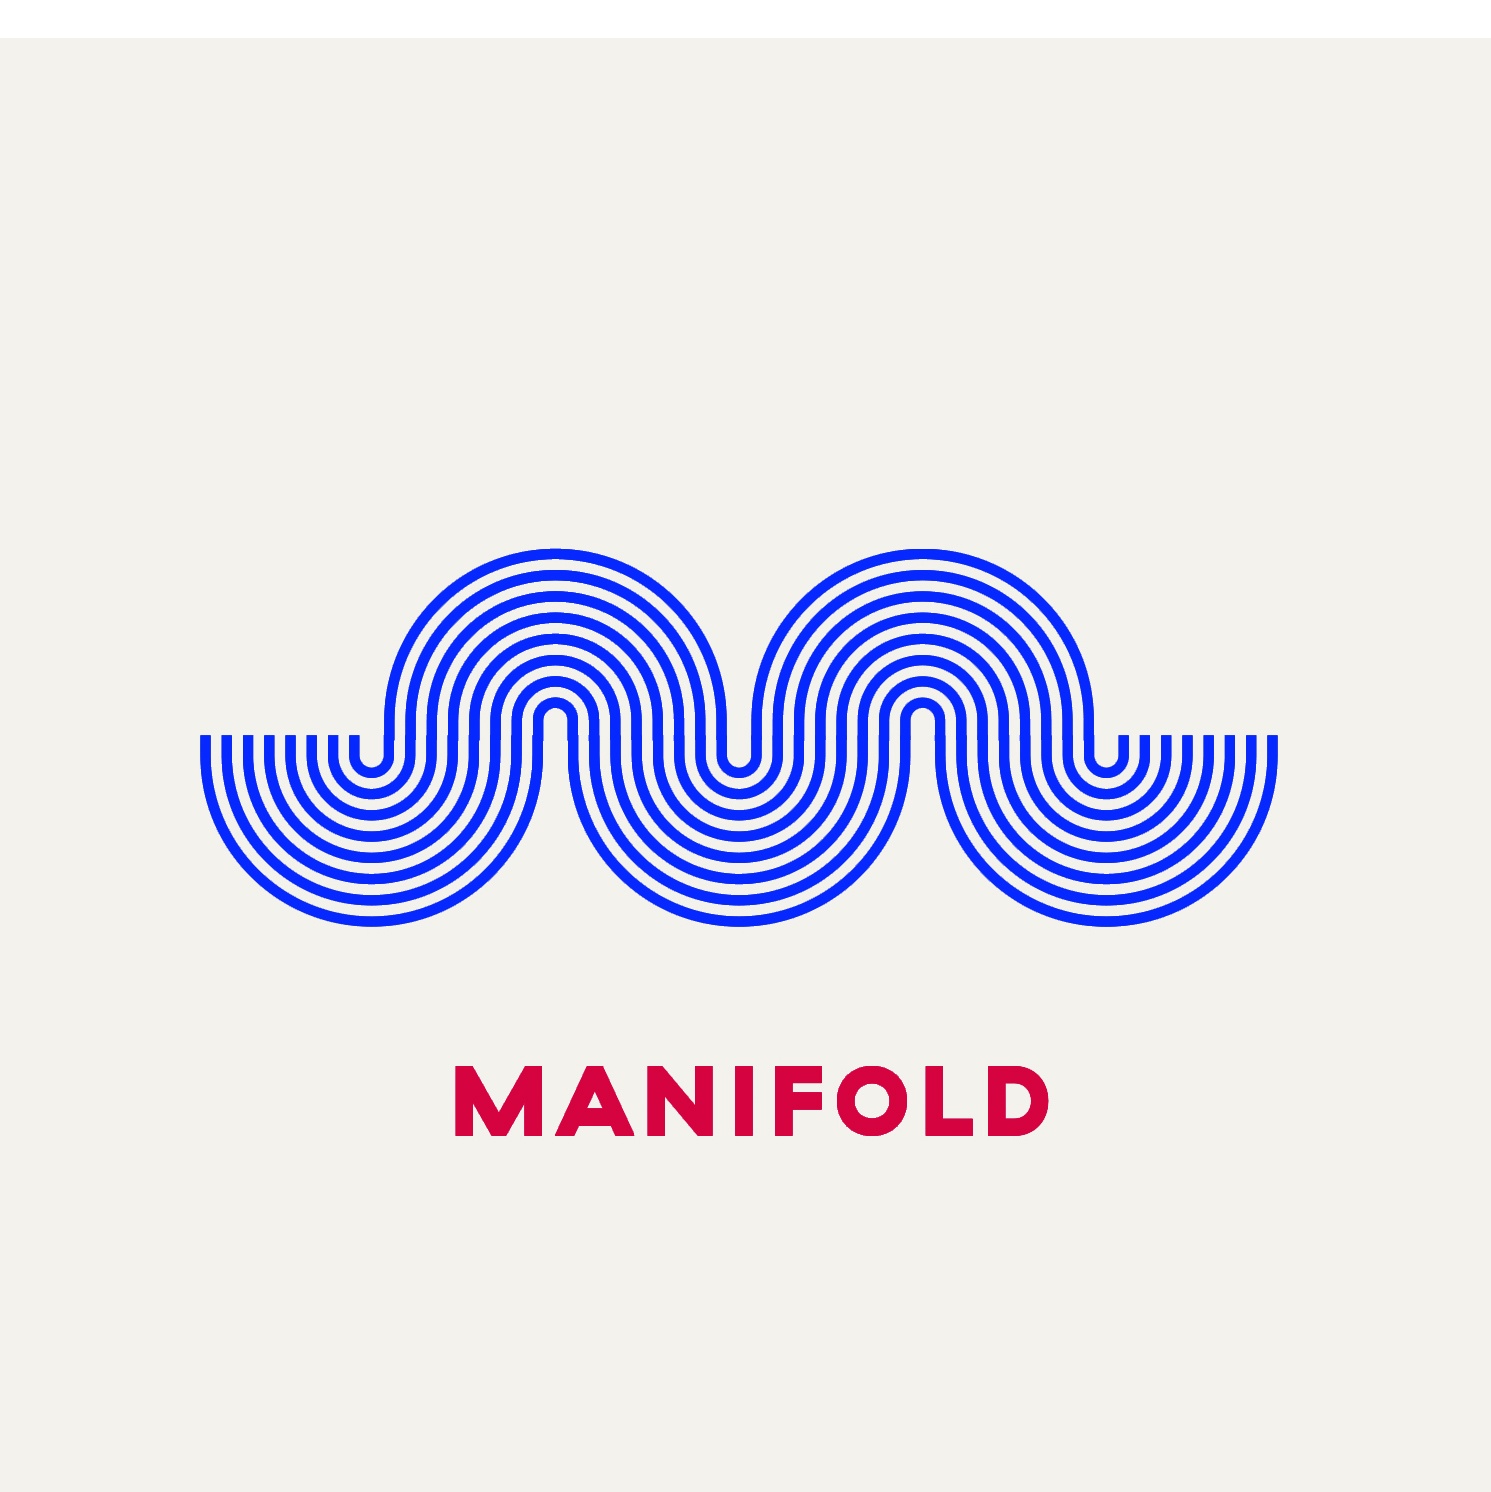 manifold logo design by logo designer Garbett for your inspiration and for the worlds largest logo competition